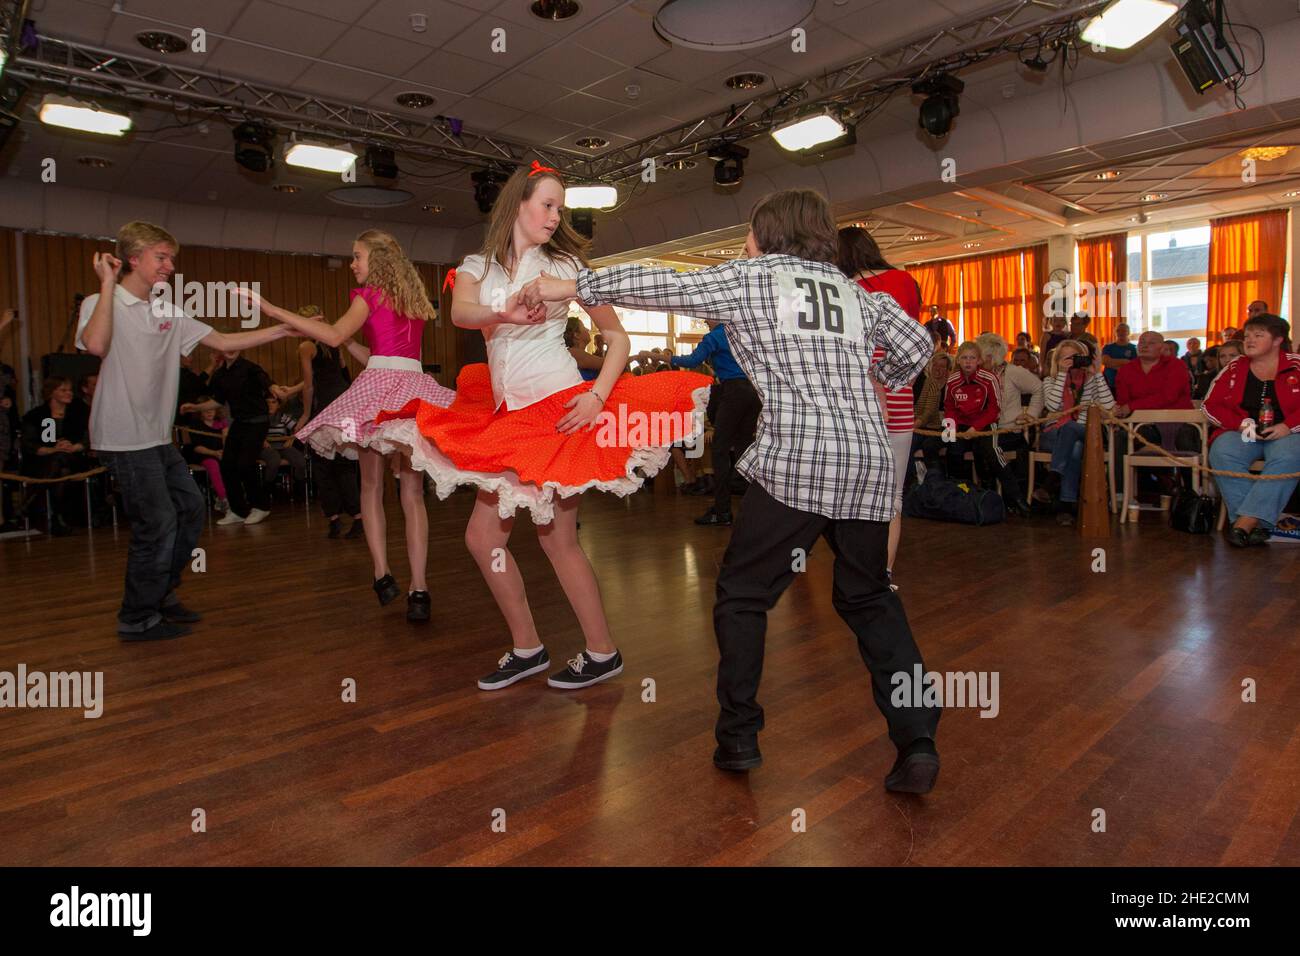 Young people compete in dance. Stock Photo